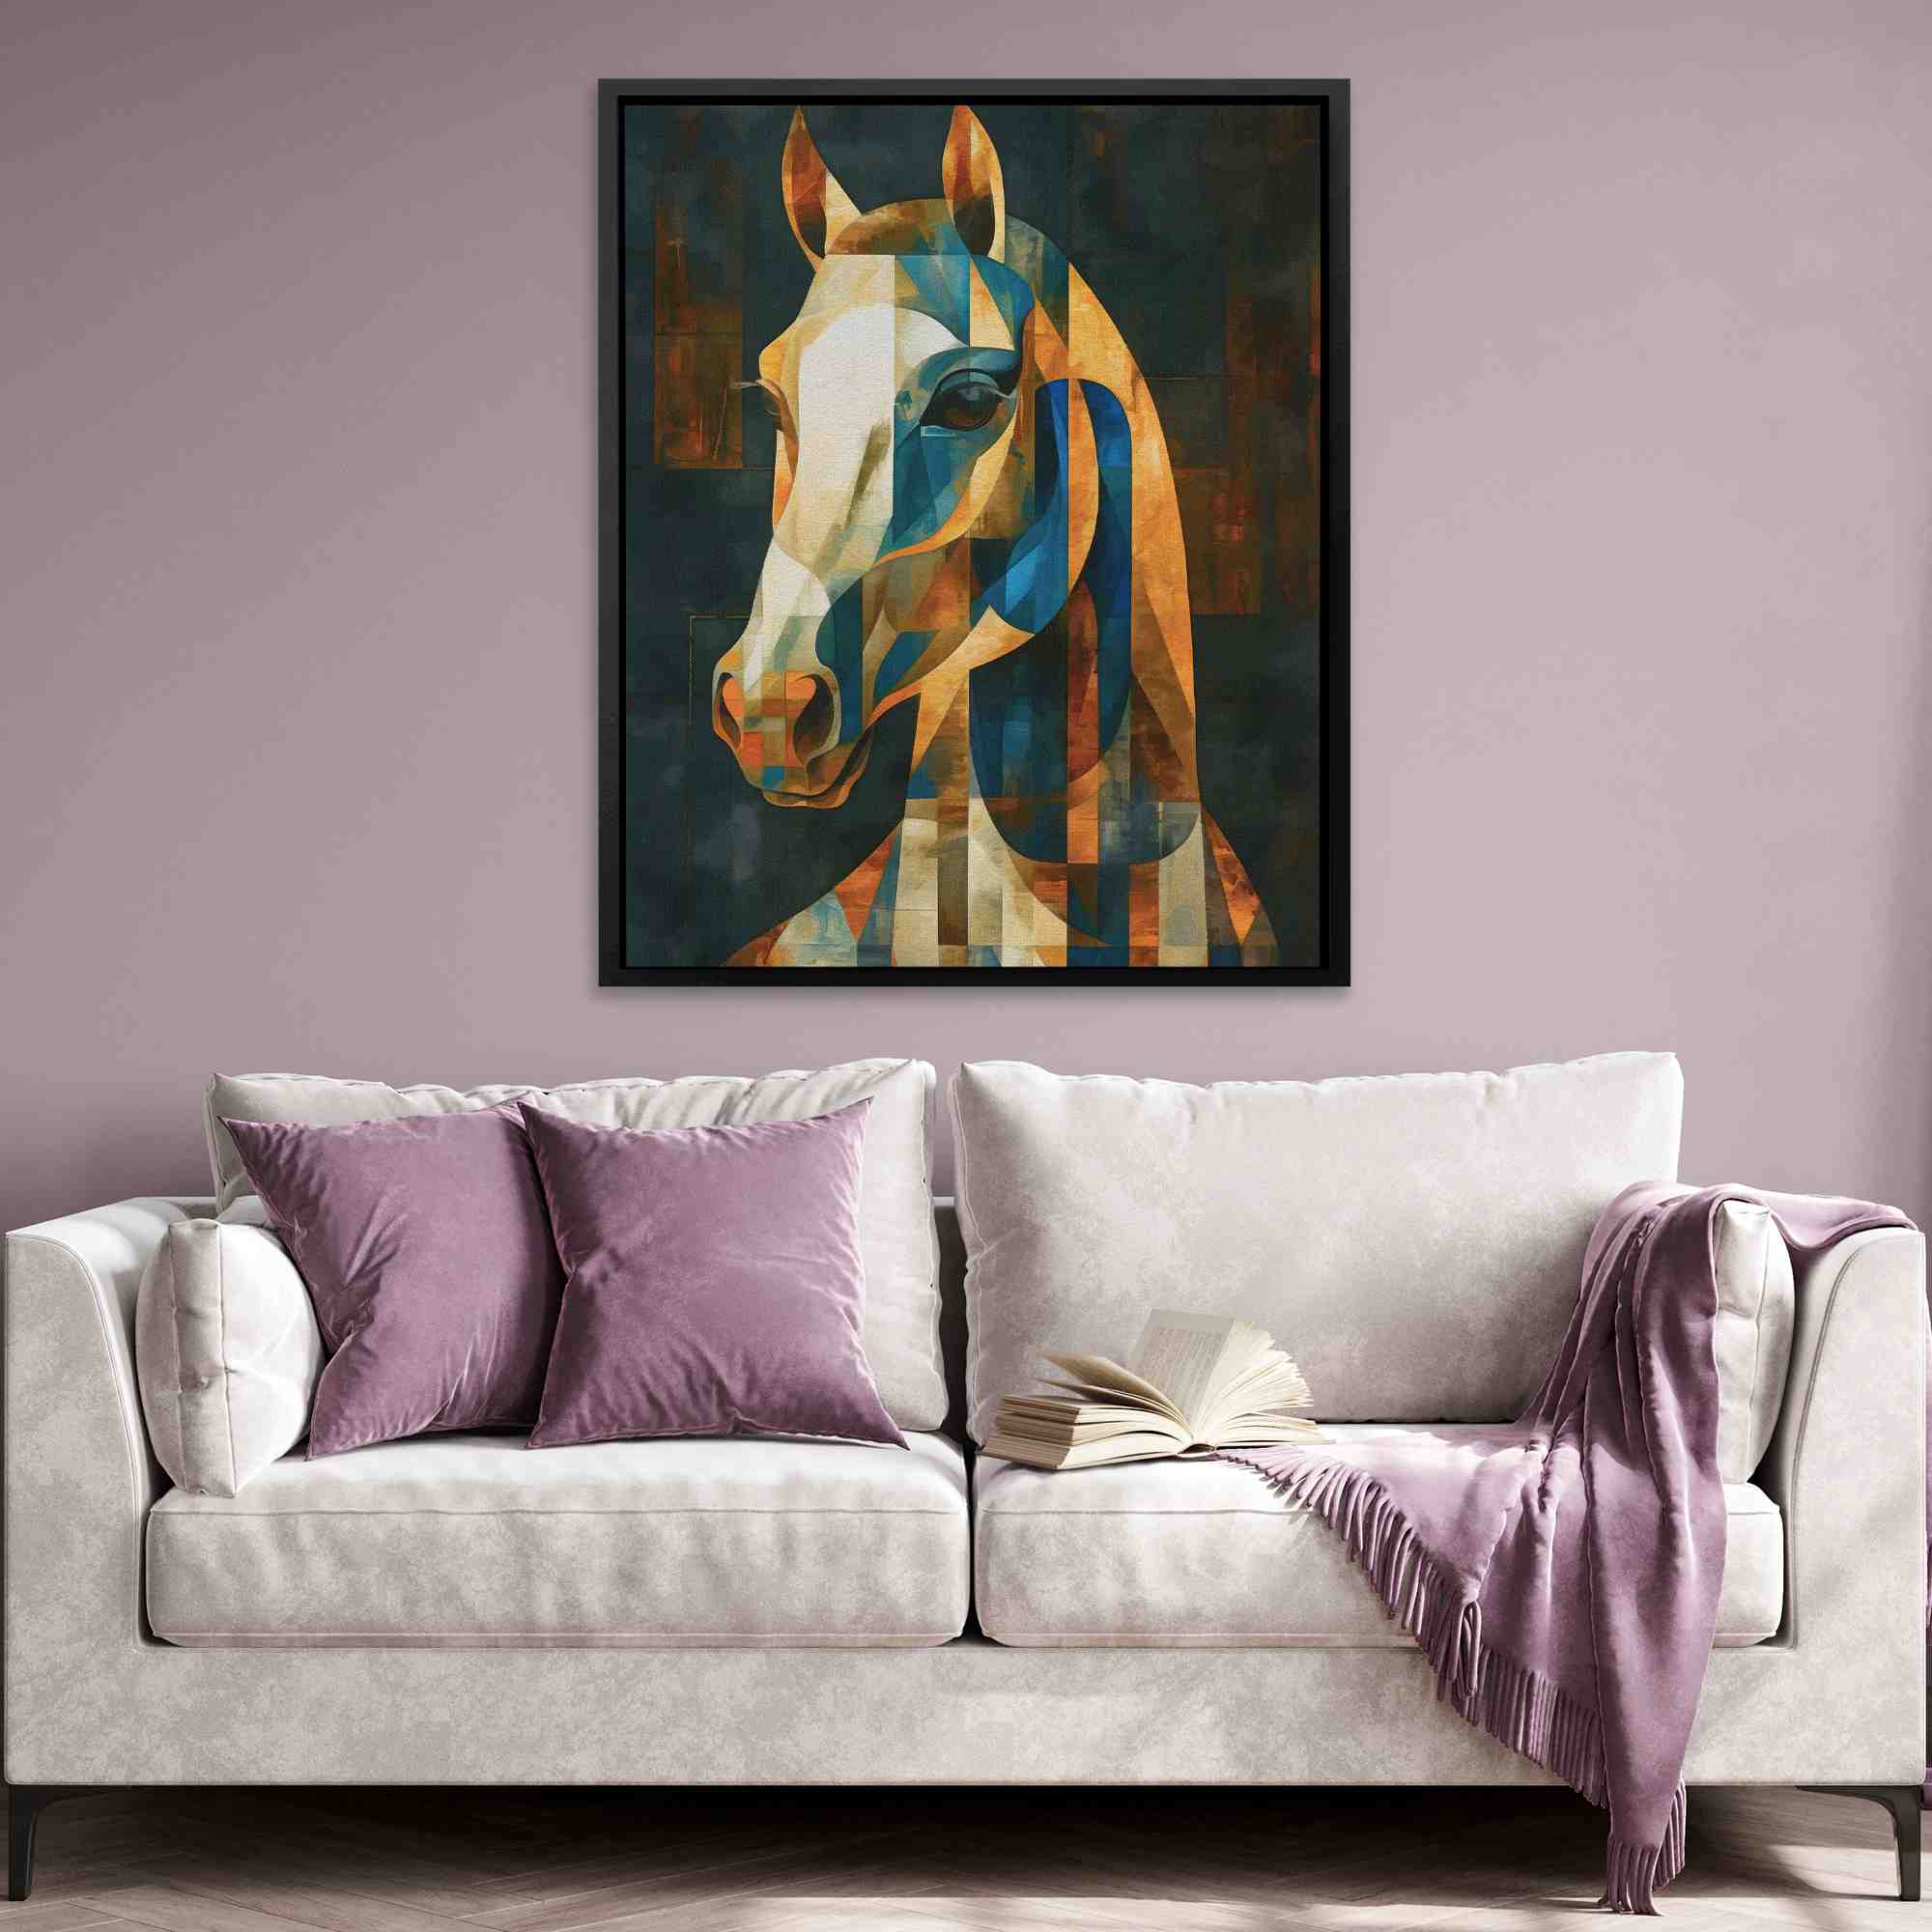 a painting of a horse on a wall